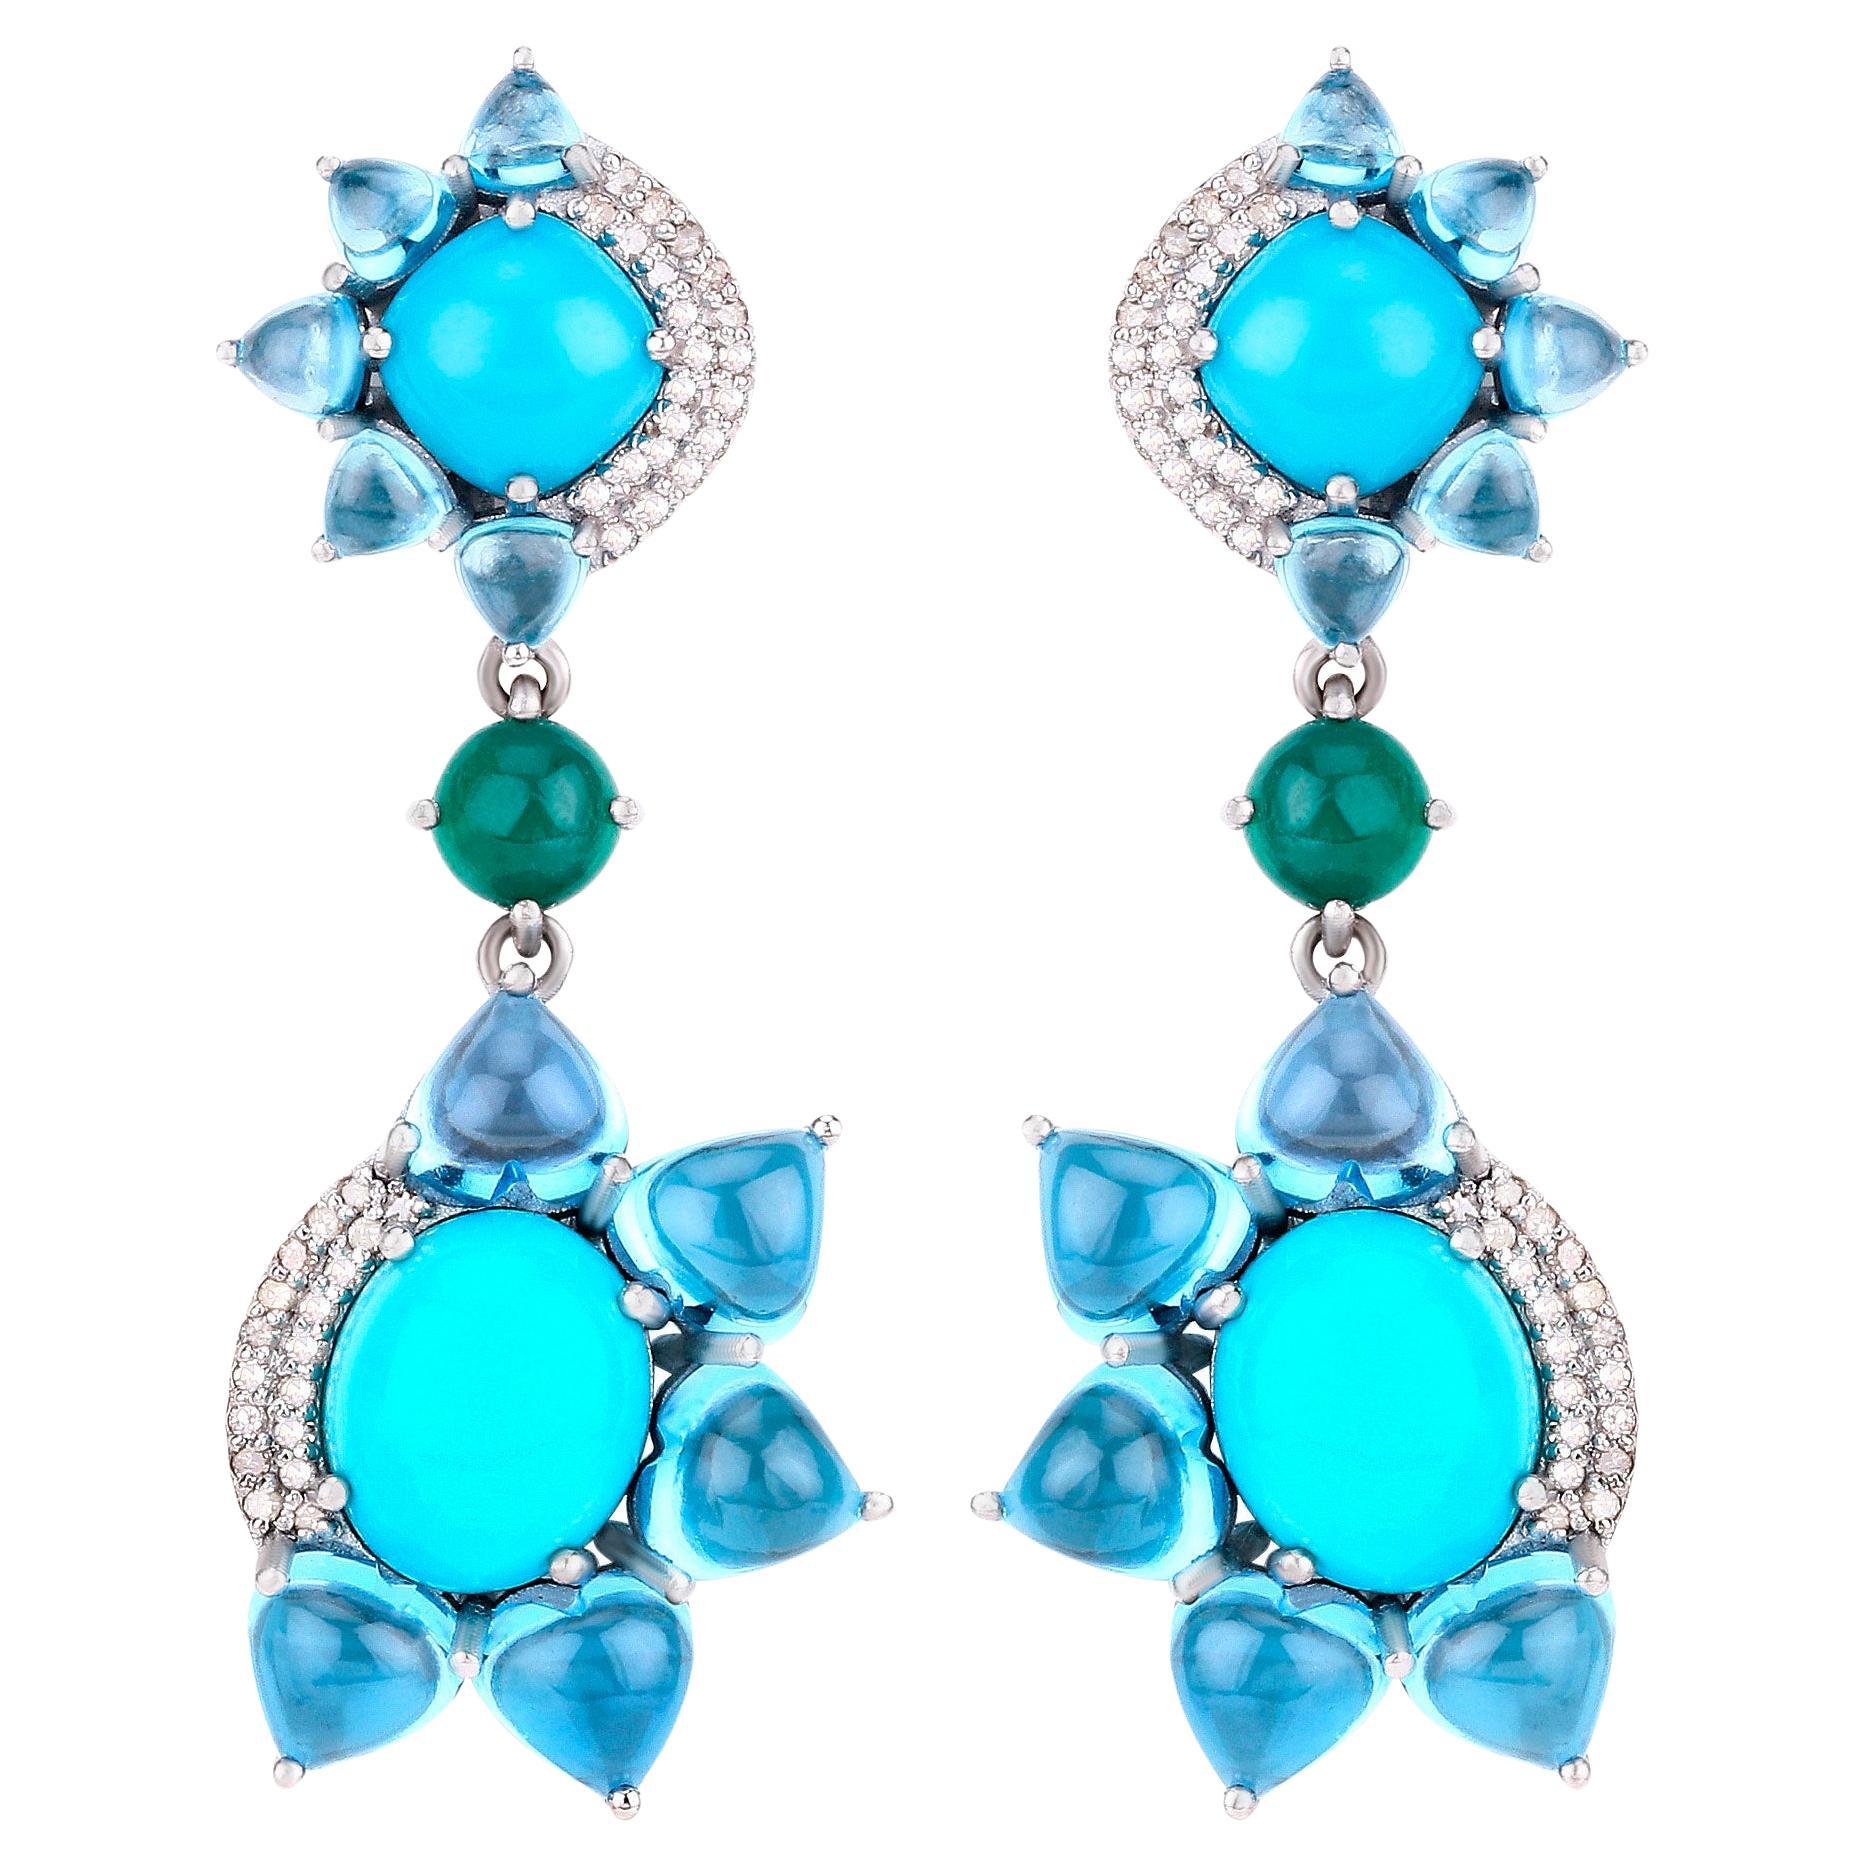 Gemstones Earrings Topaz Emerald Turquoise Diamond 38.95 Carats Sterling Silver